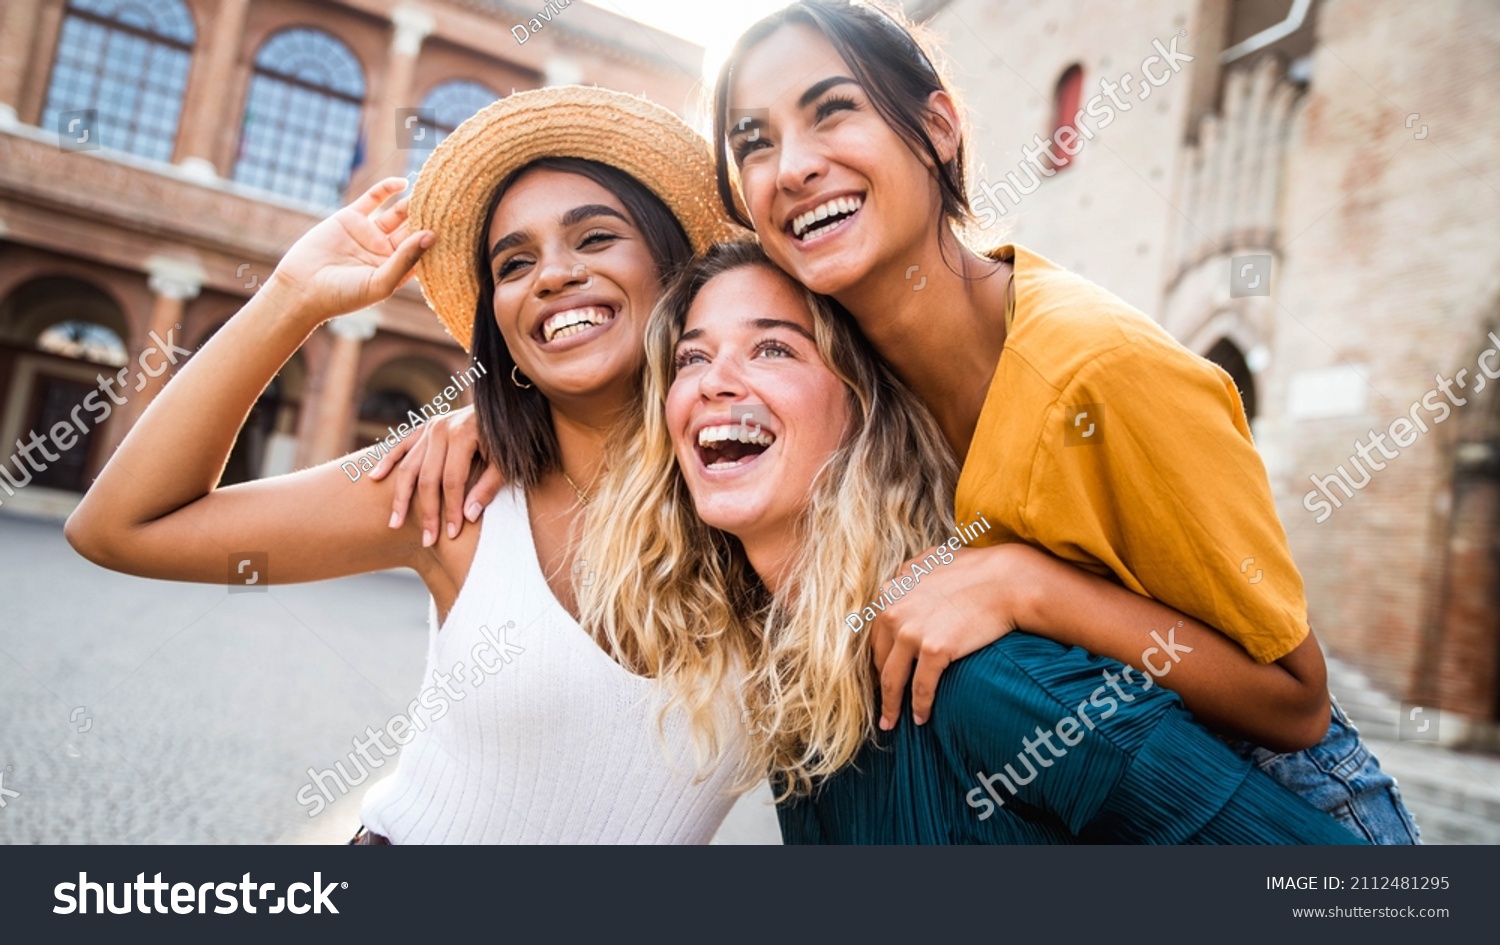 Three young multiracial women having fun on city street outdoors - Mixed race female friends enjoying a holiday day out together - Happy lifestyle, youth and young females concept #2112481295